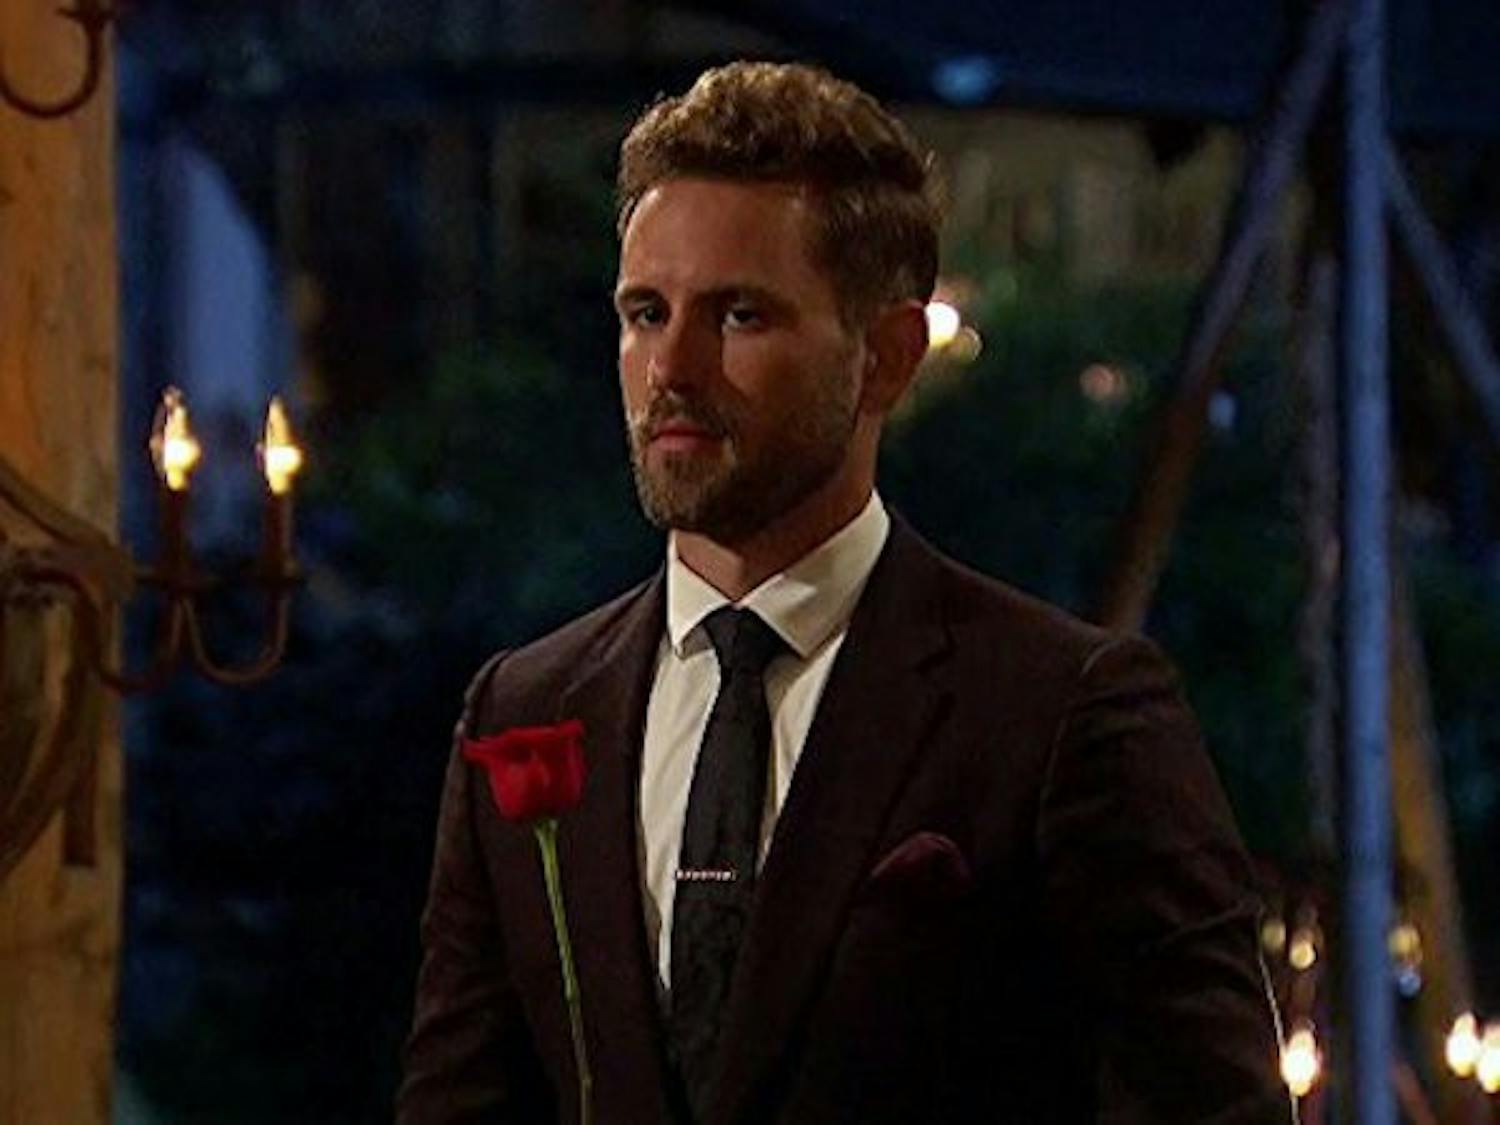 Current Bachelor Nick Viall holds a rose during an episode of The Bachelor.